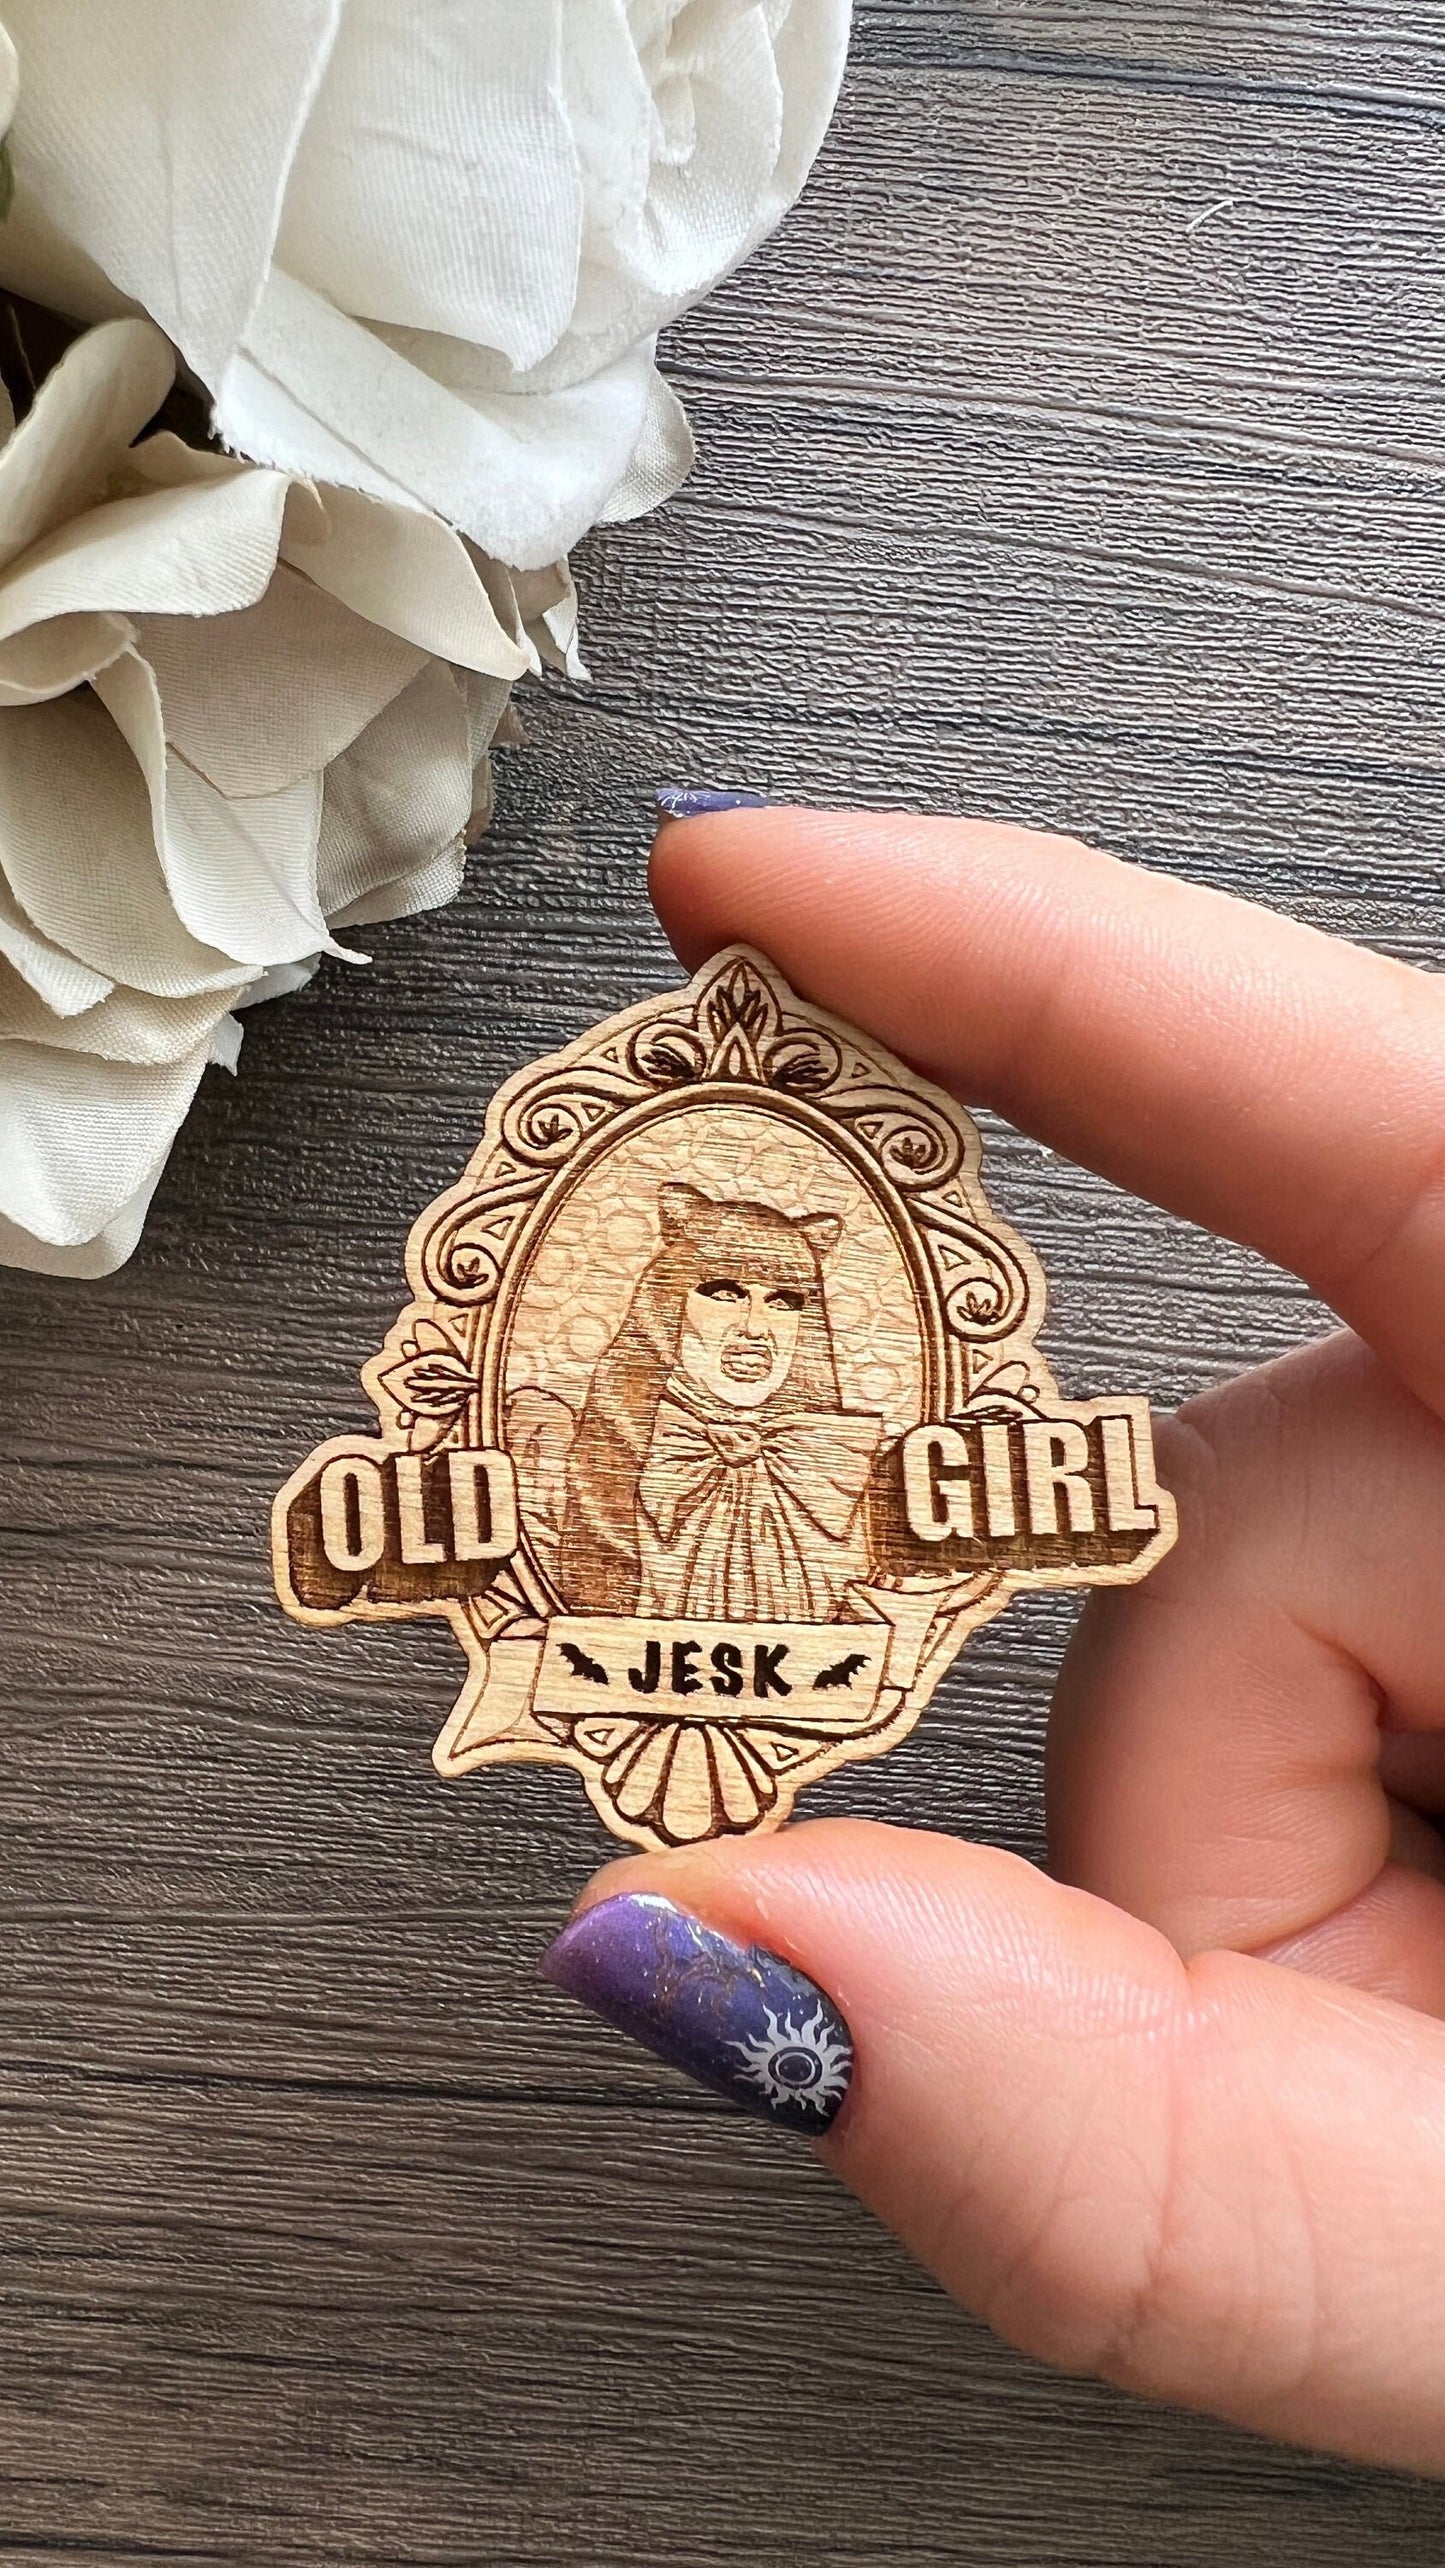 What We Do In The Shadows / New Girl PIN - Lapel Pin - WWDITS Pin, New Girl Pin, Nadja Pin, Zooey Pin, Jesk Pin, It's Jess Pin, Mashup Pin